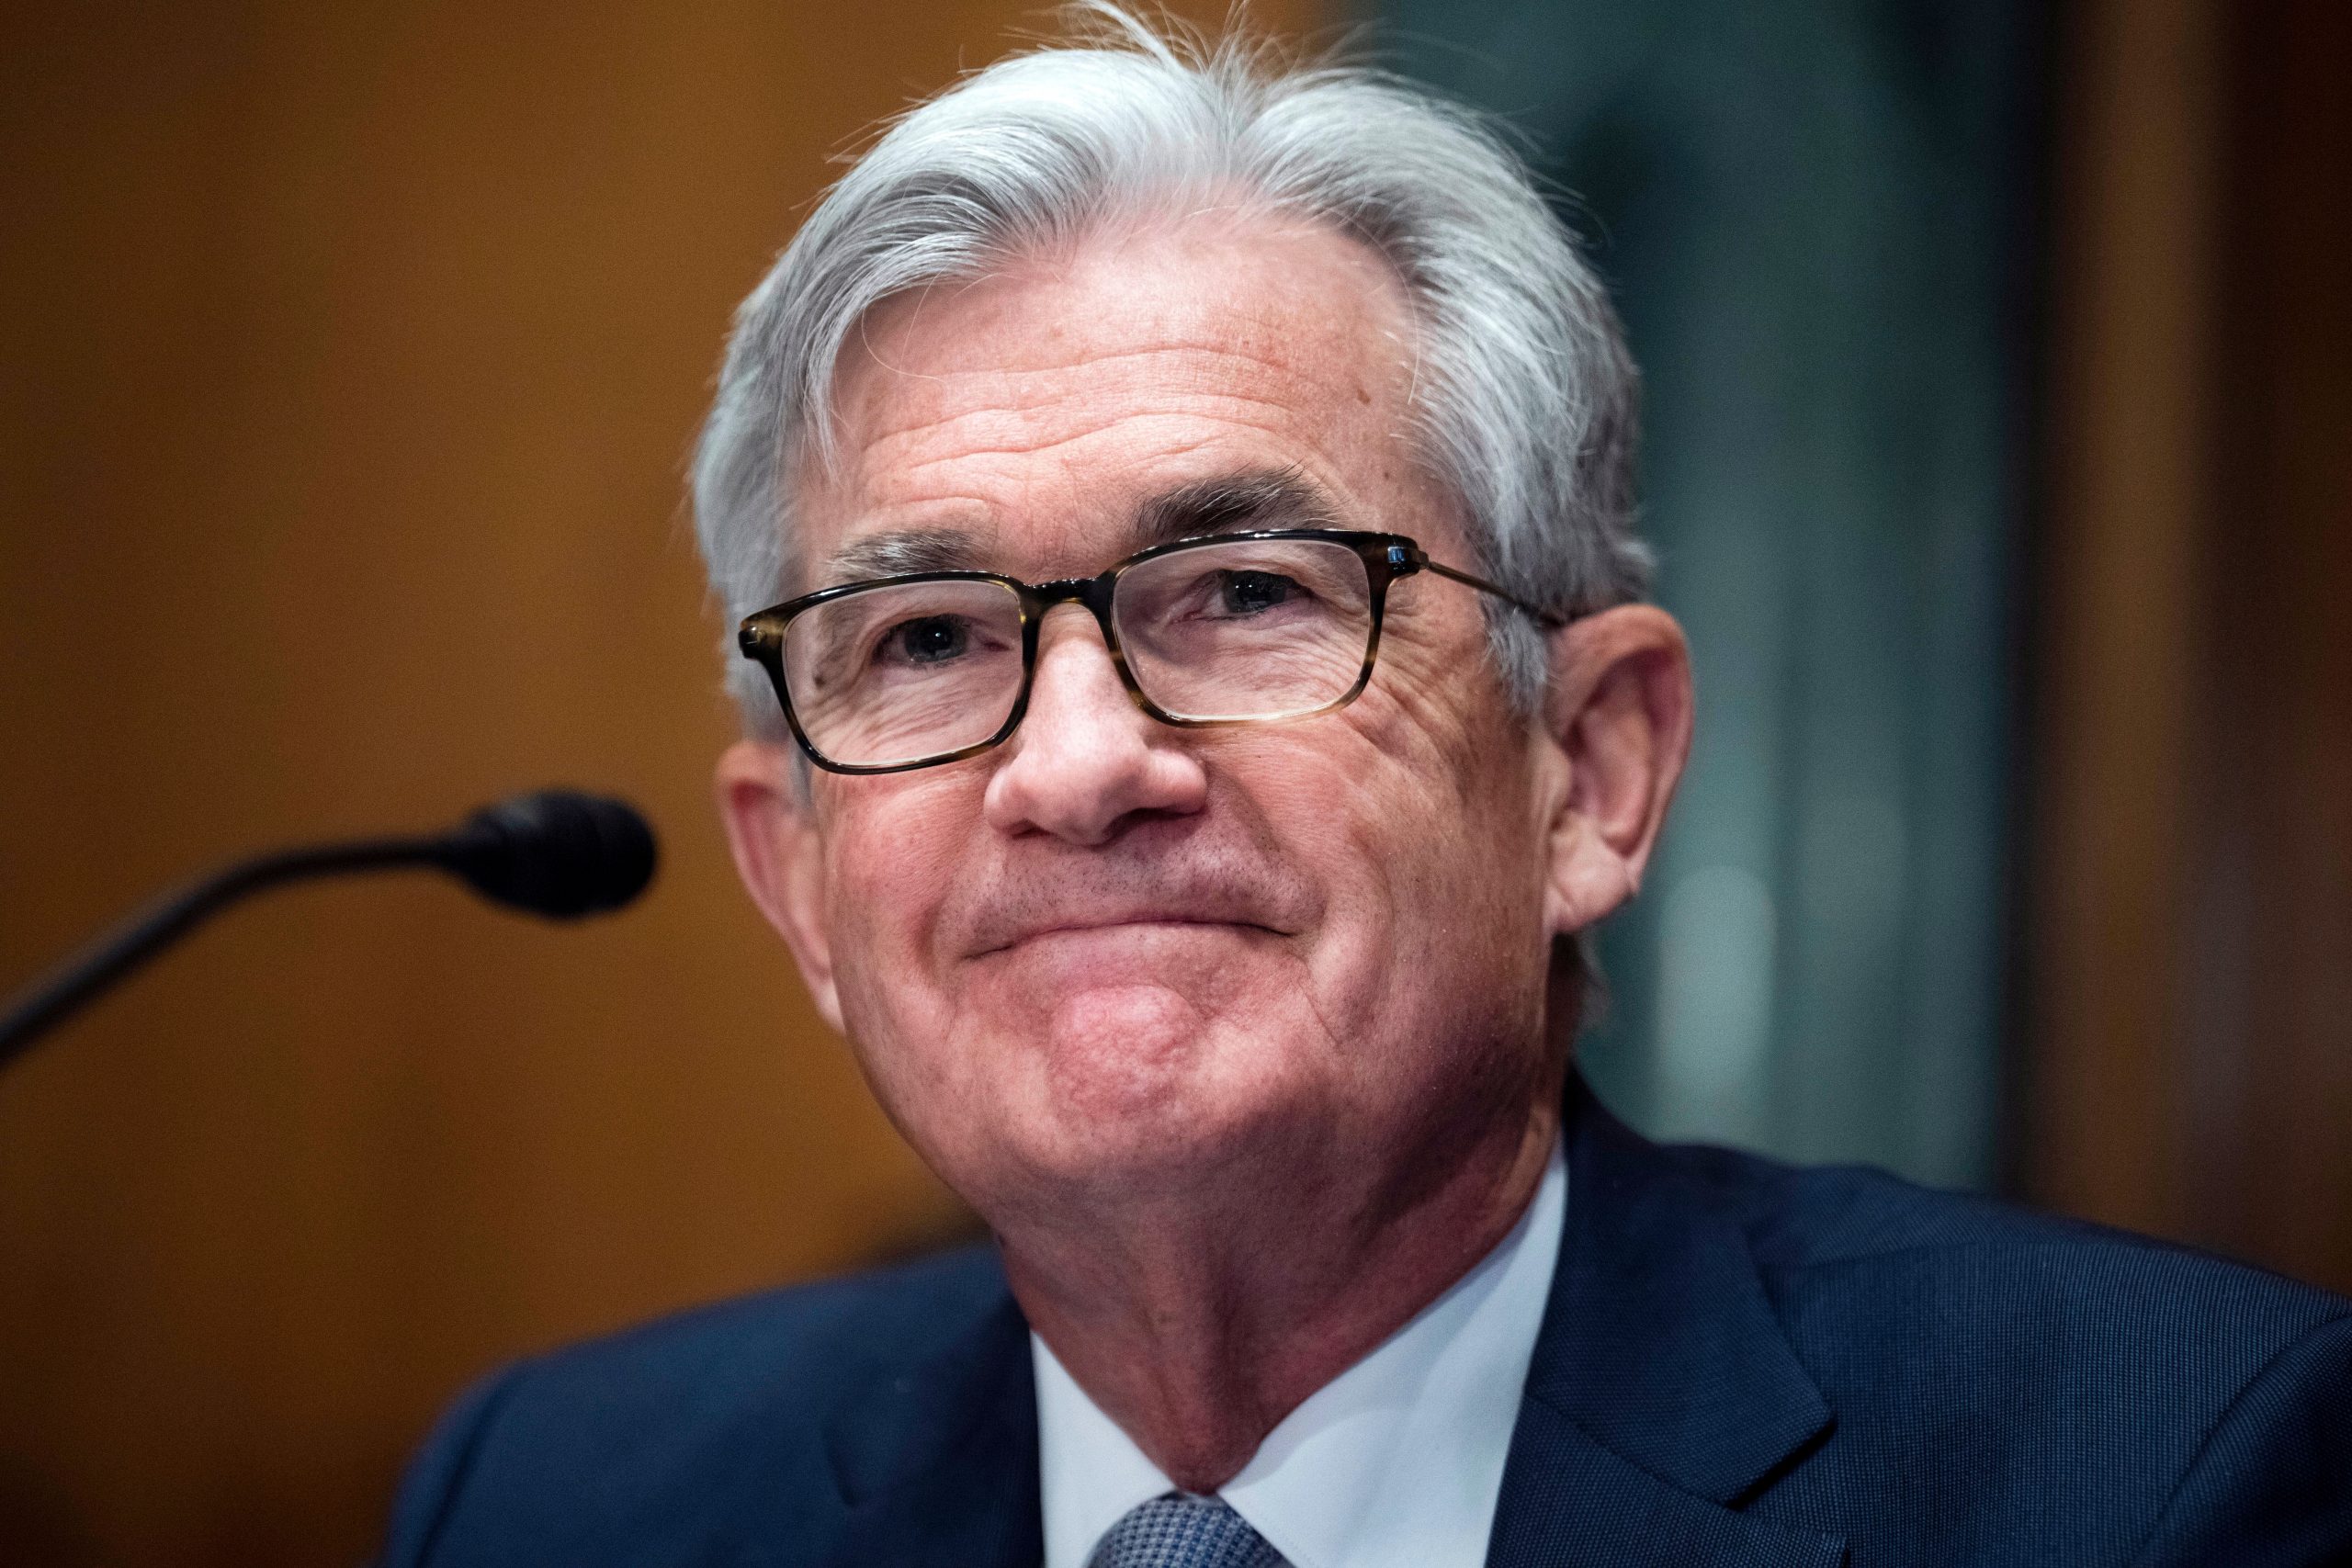 Who is Jerome Powell?